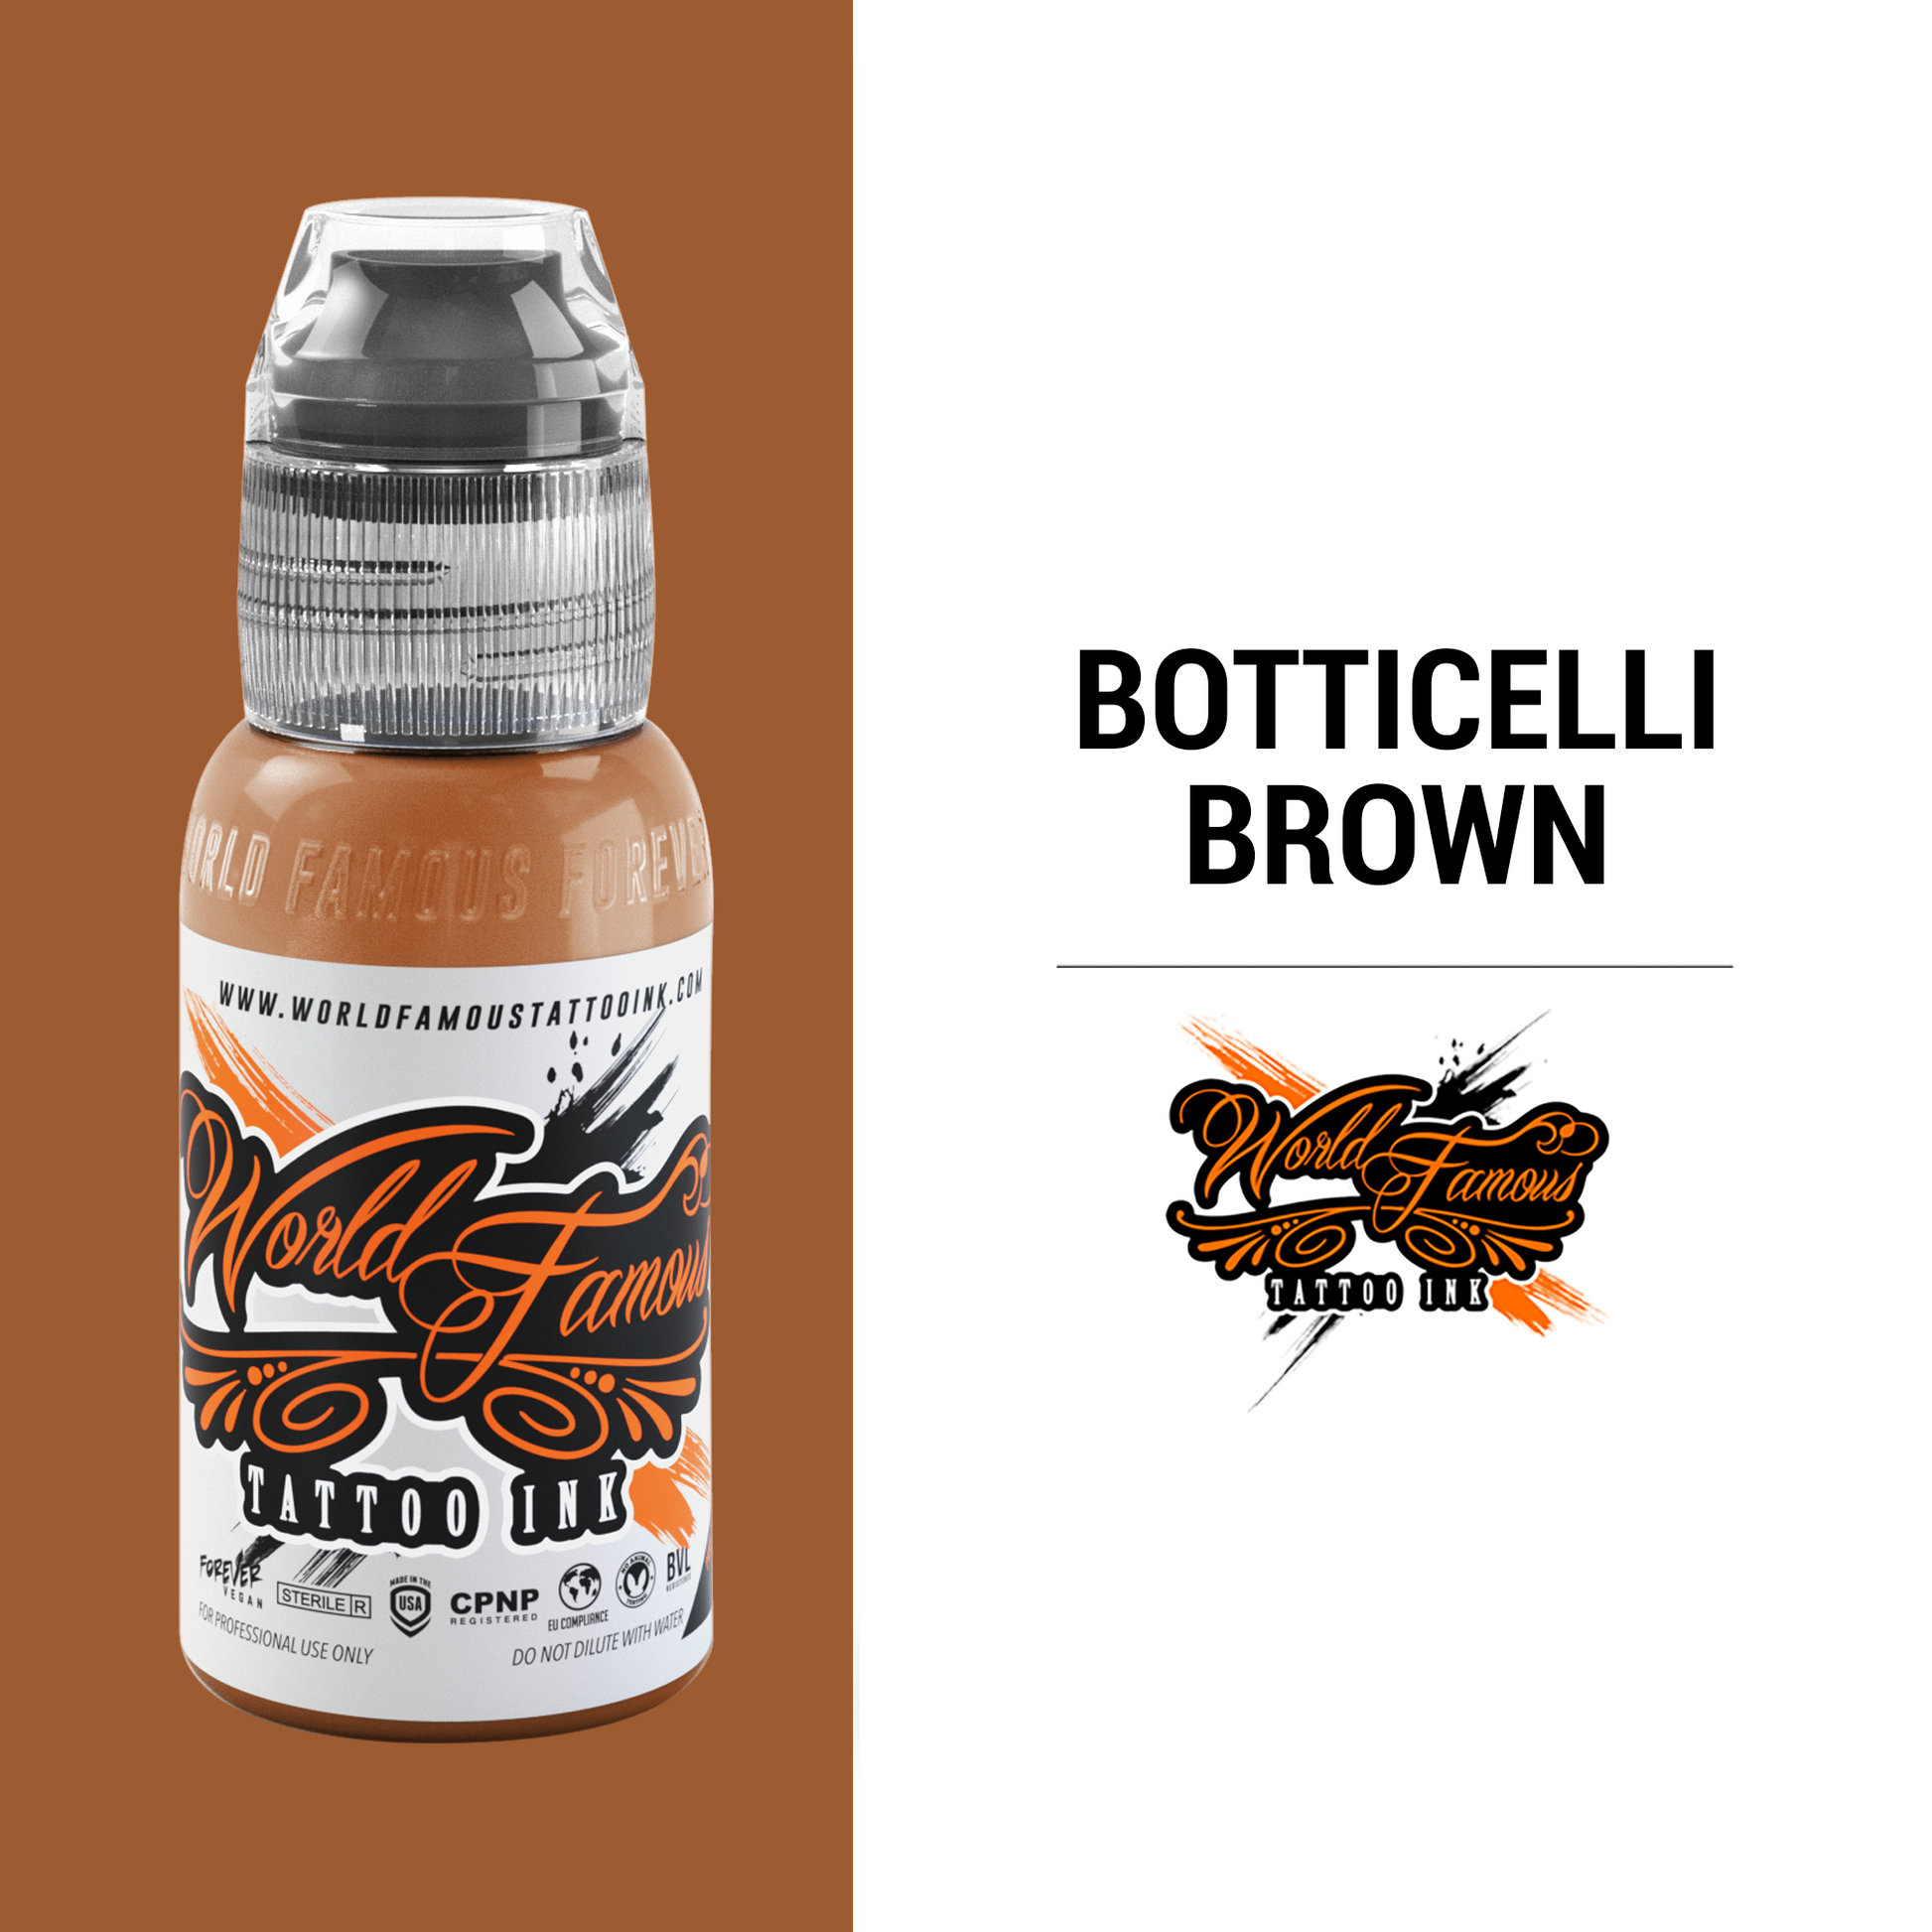 Botticelli Brown | World Famous Tattoo Ink